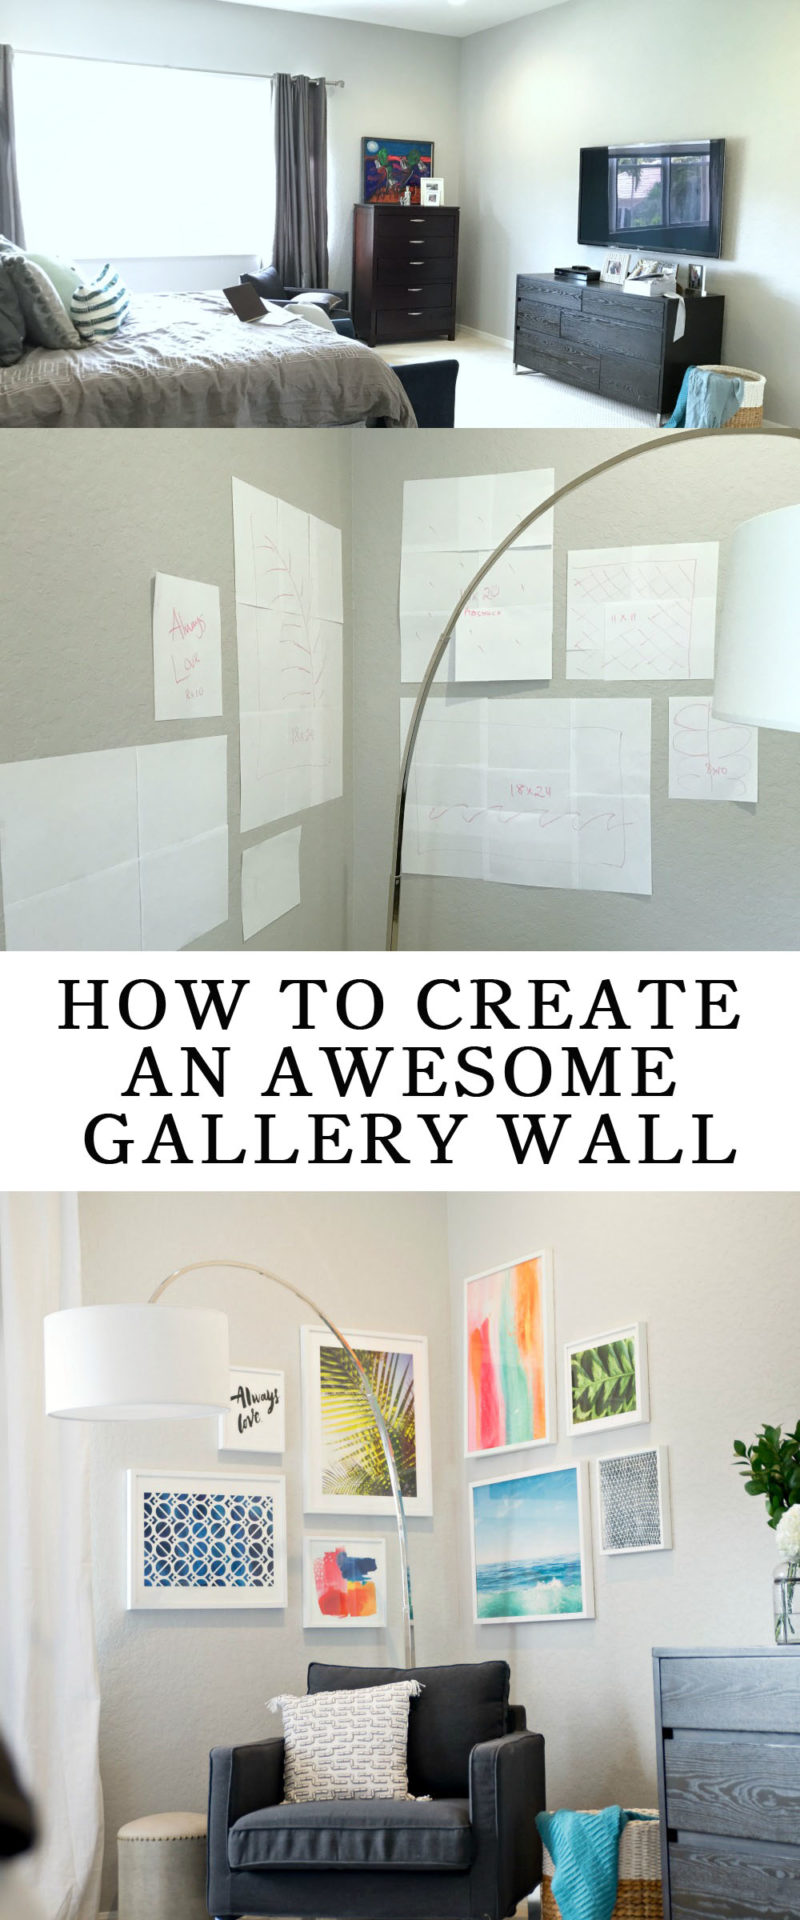 How to create your own awesome gallery wall -- tips from a designer! // the modern savvy